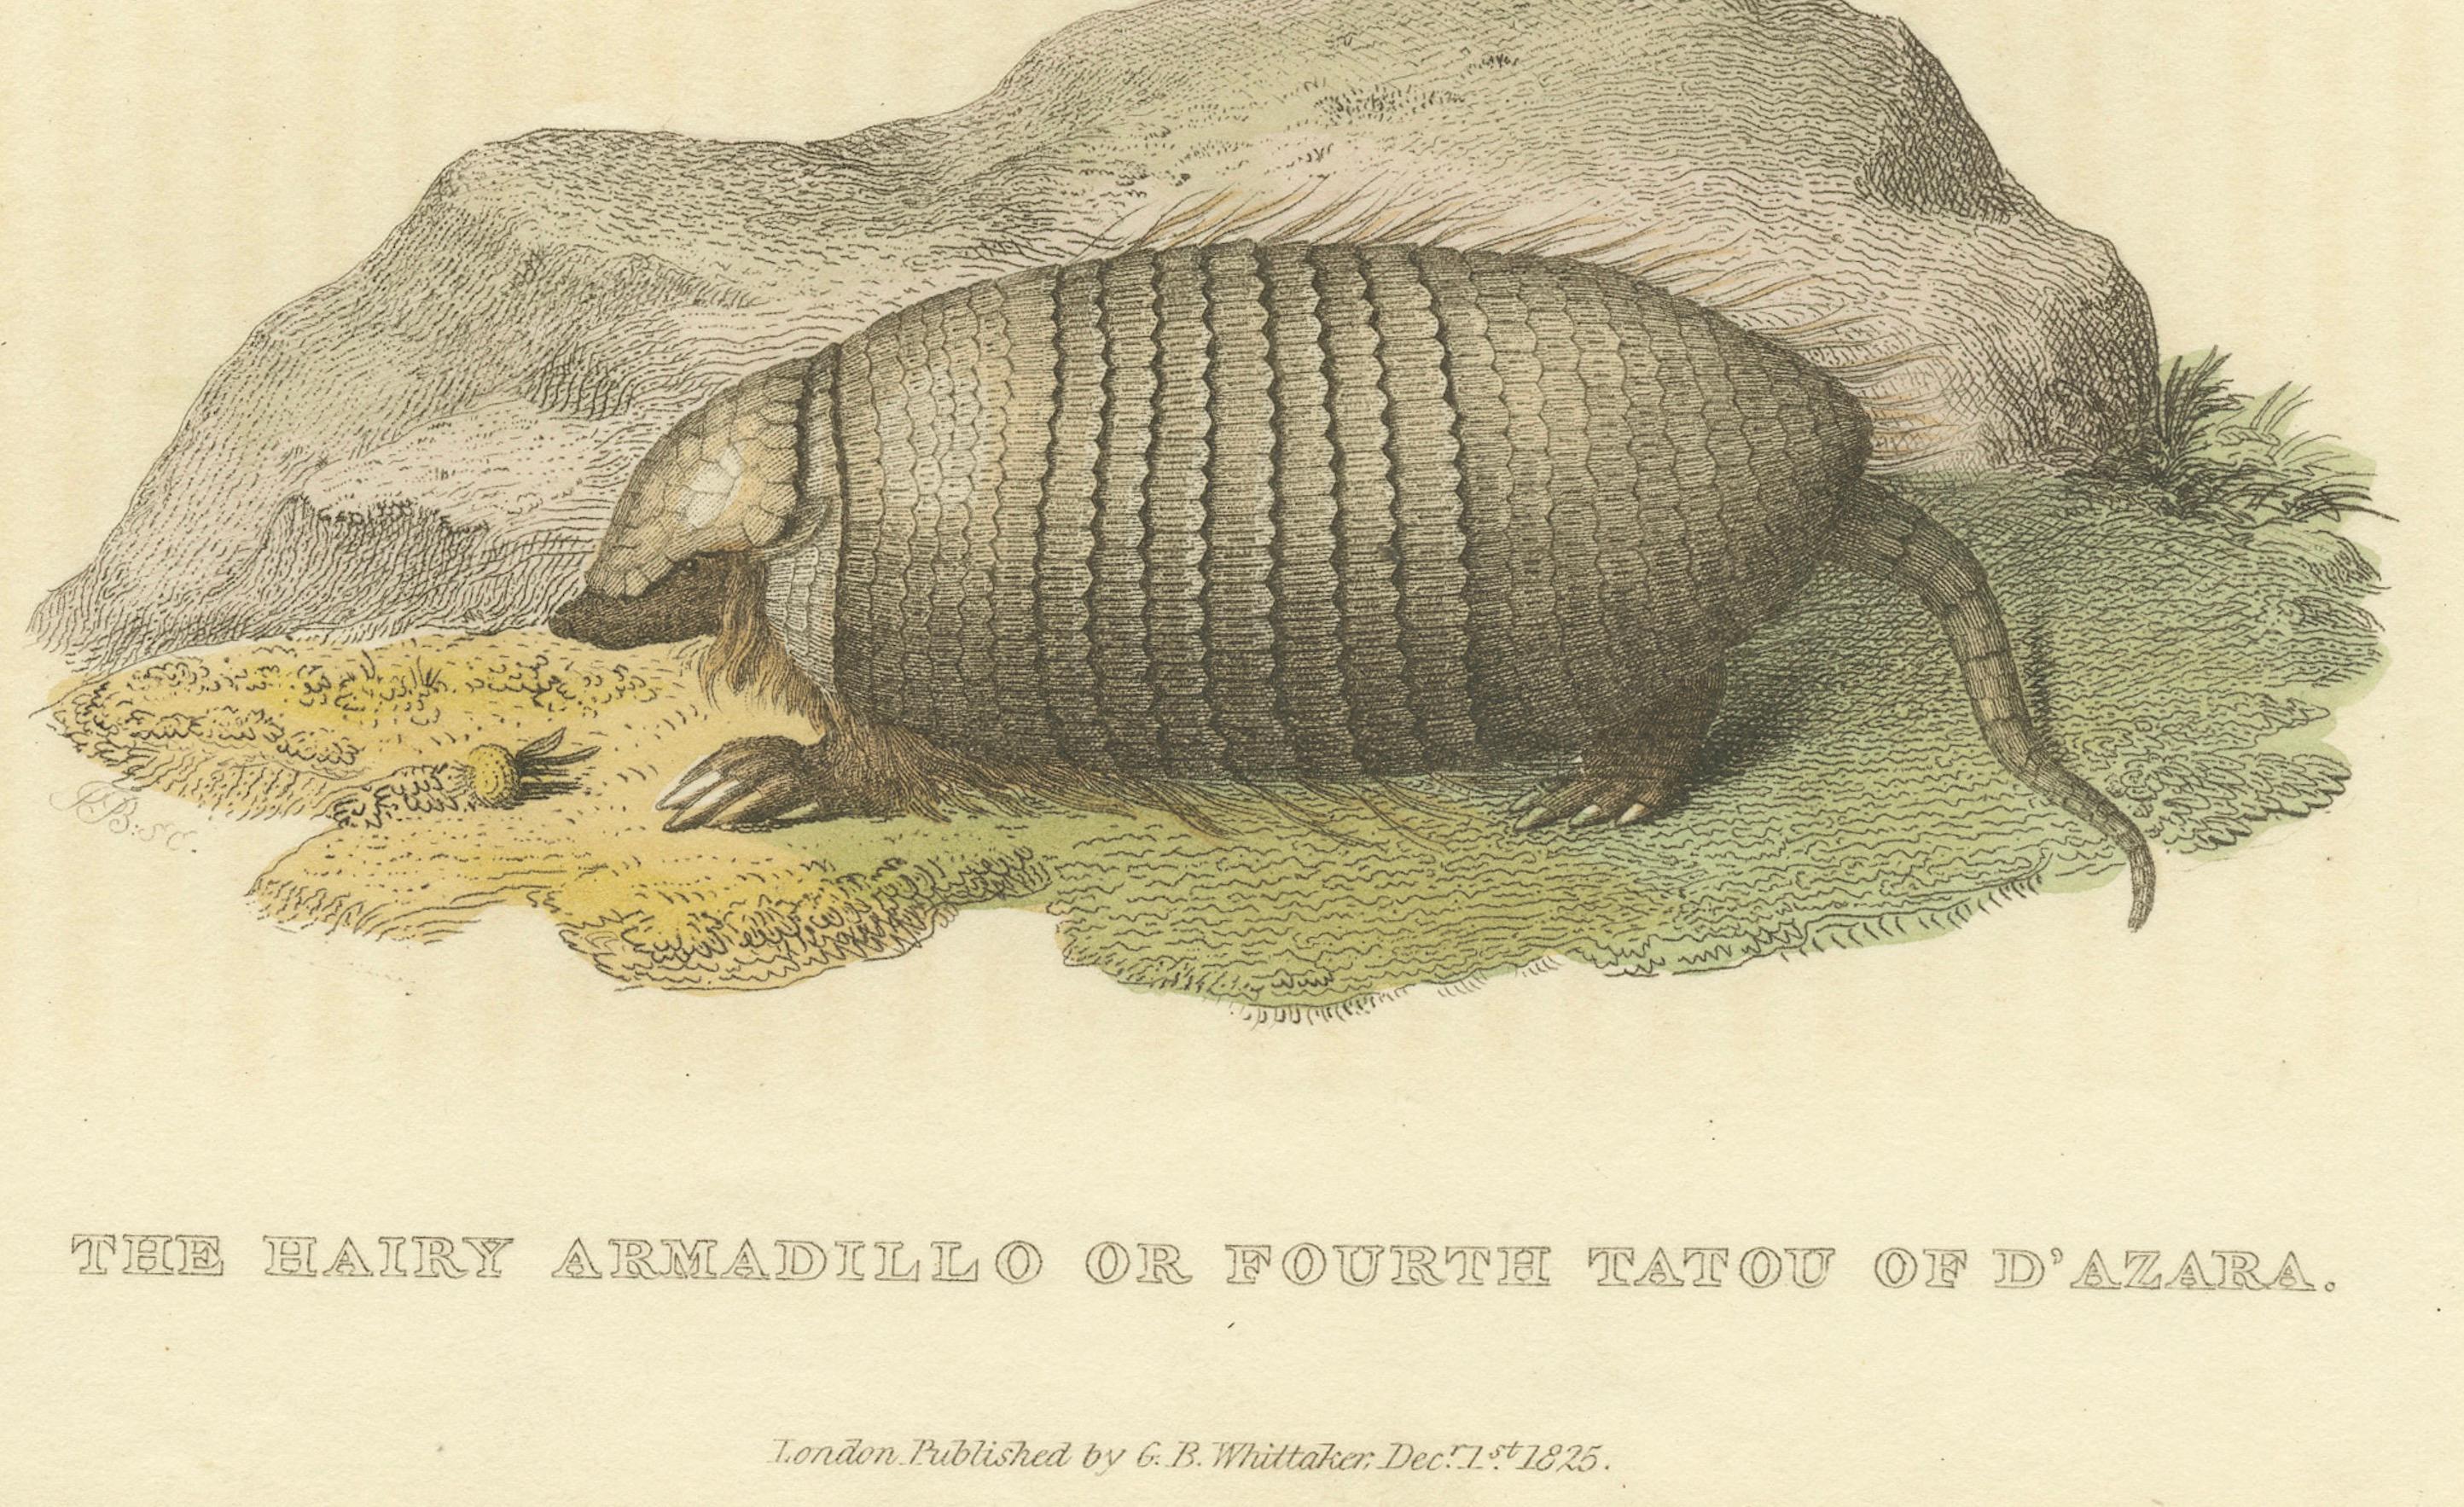 Paper An Original 1825 Illustration of the Large Hairy Armadillo by G.B. Whittaker For Sale